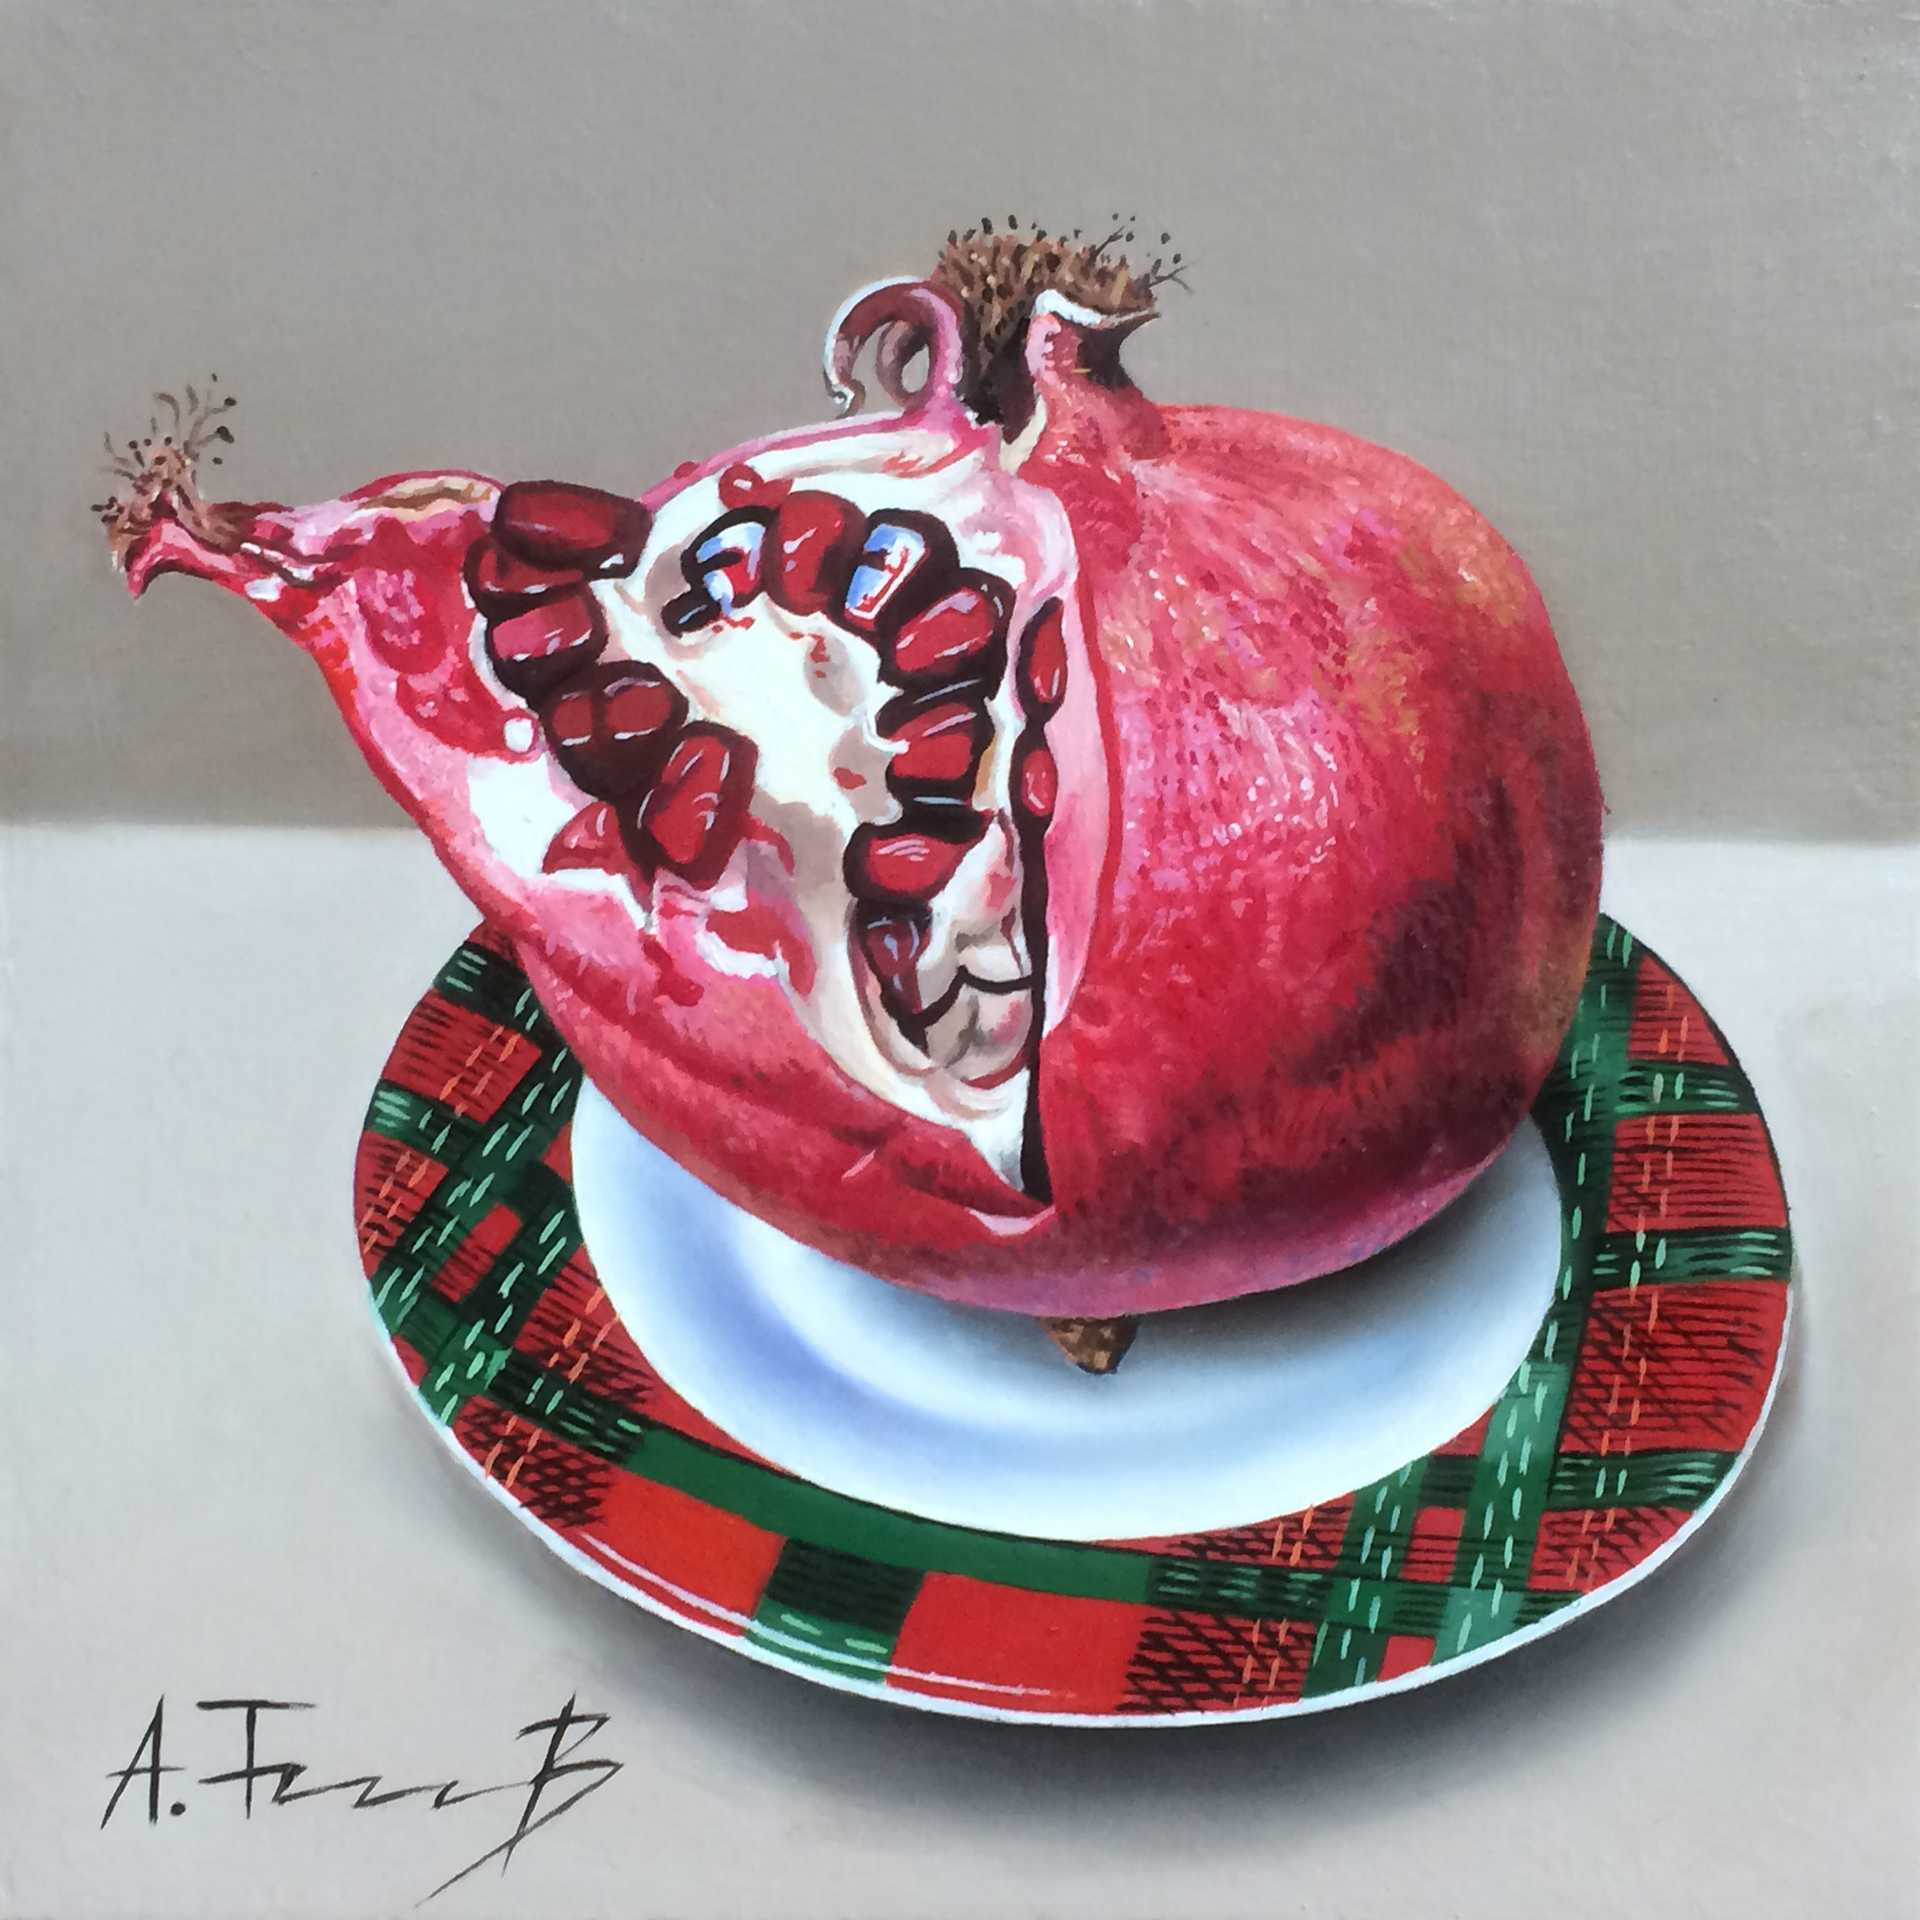 Pomegranate in a Saucer